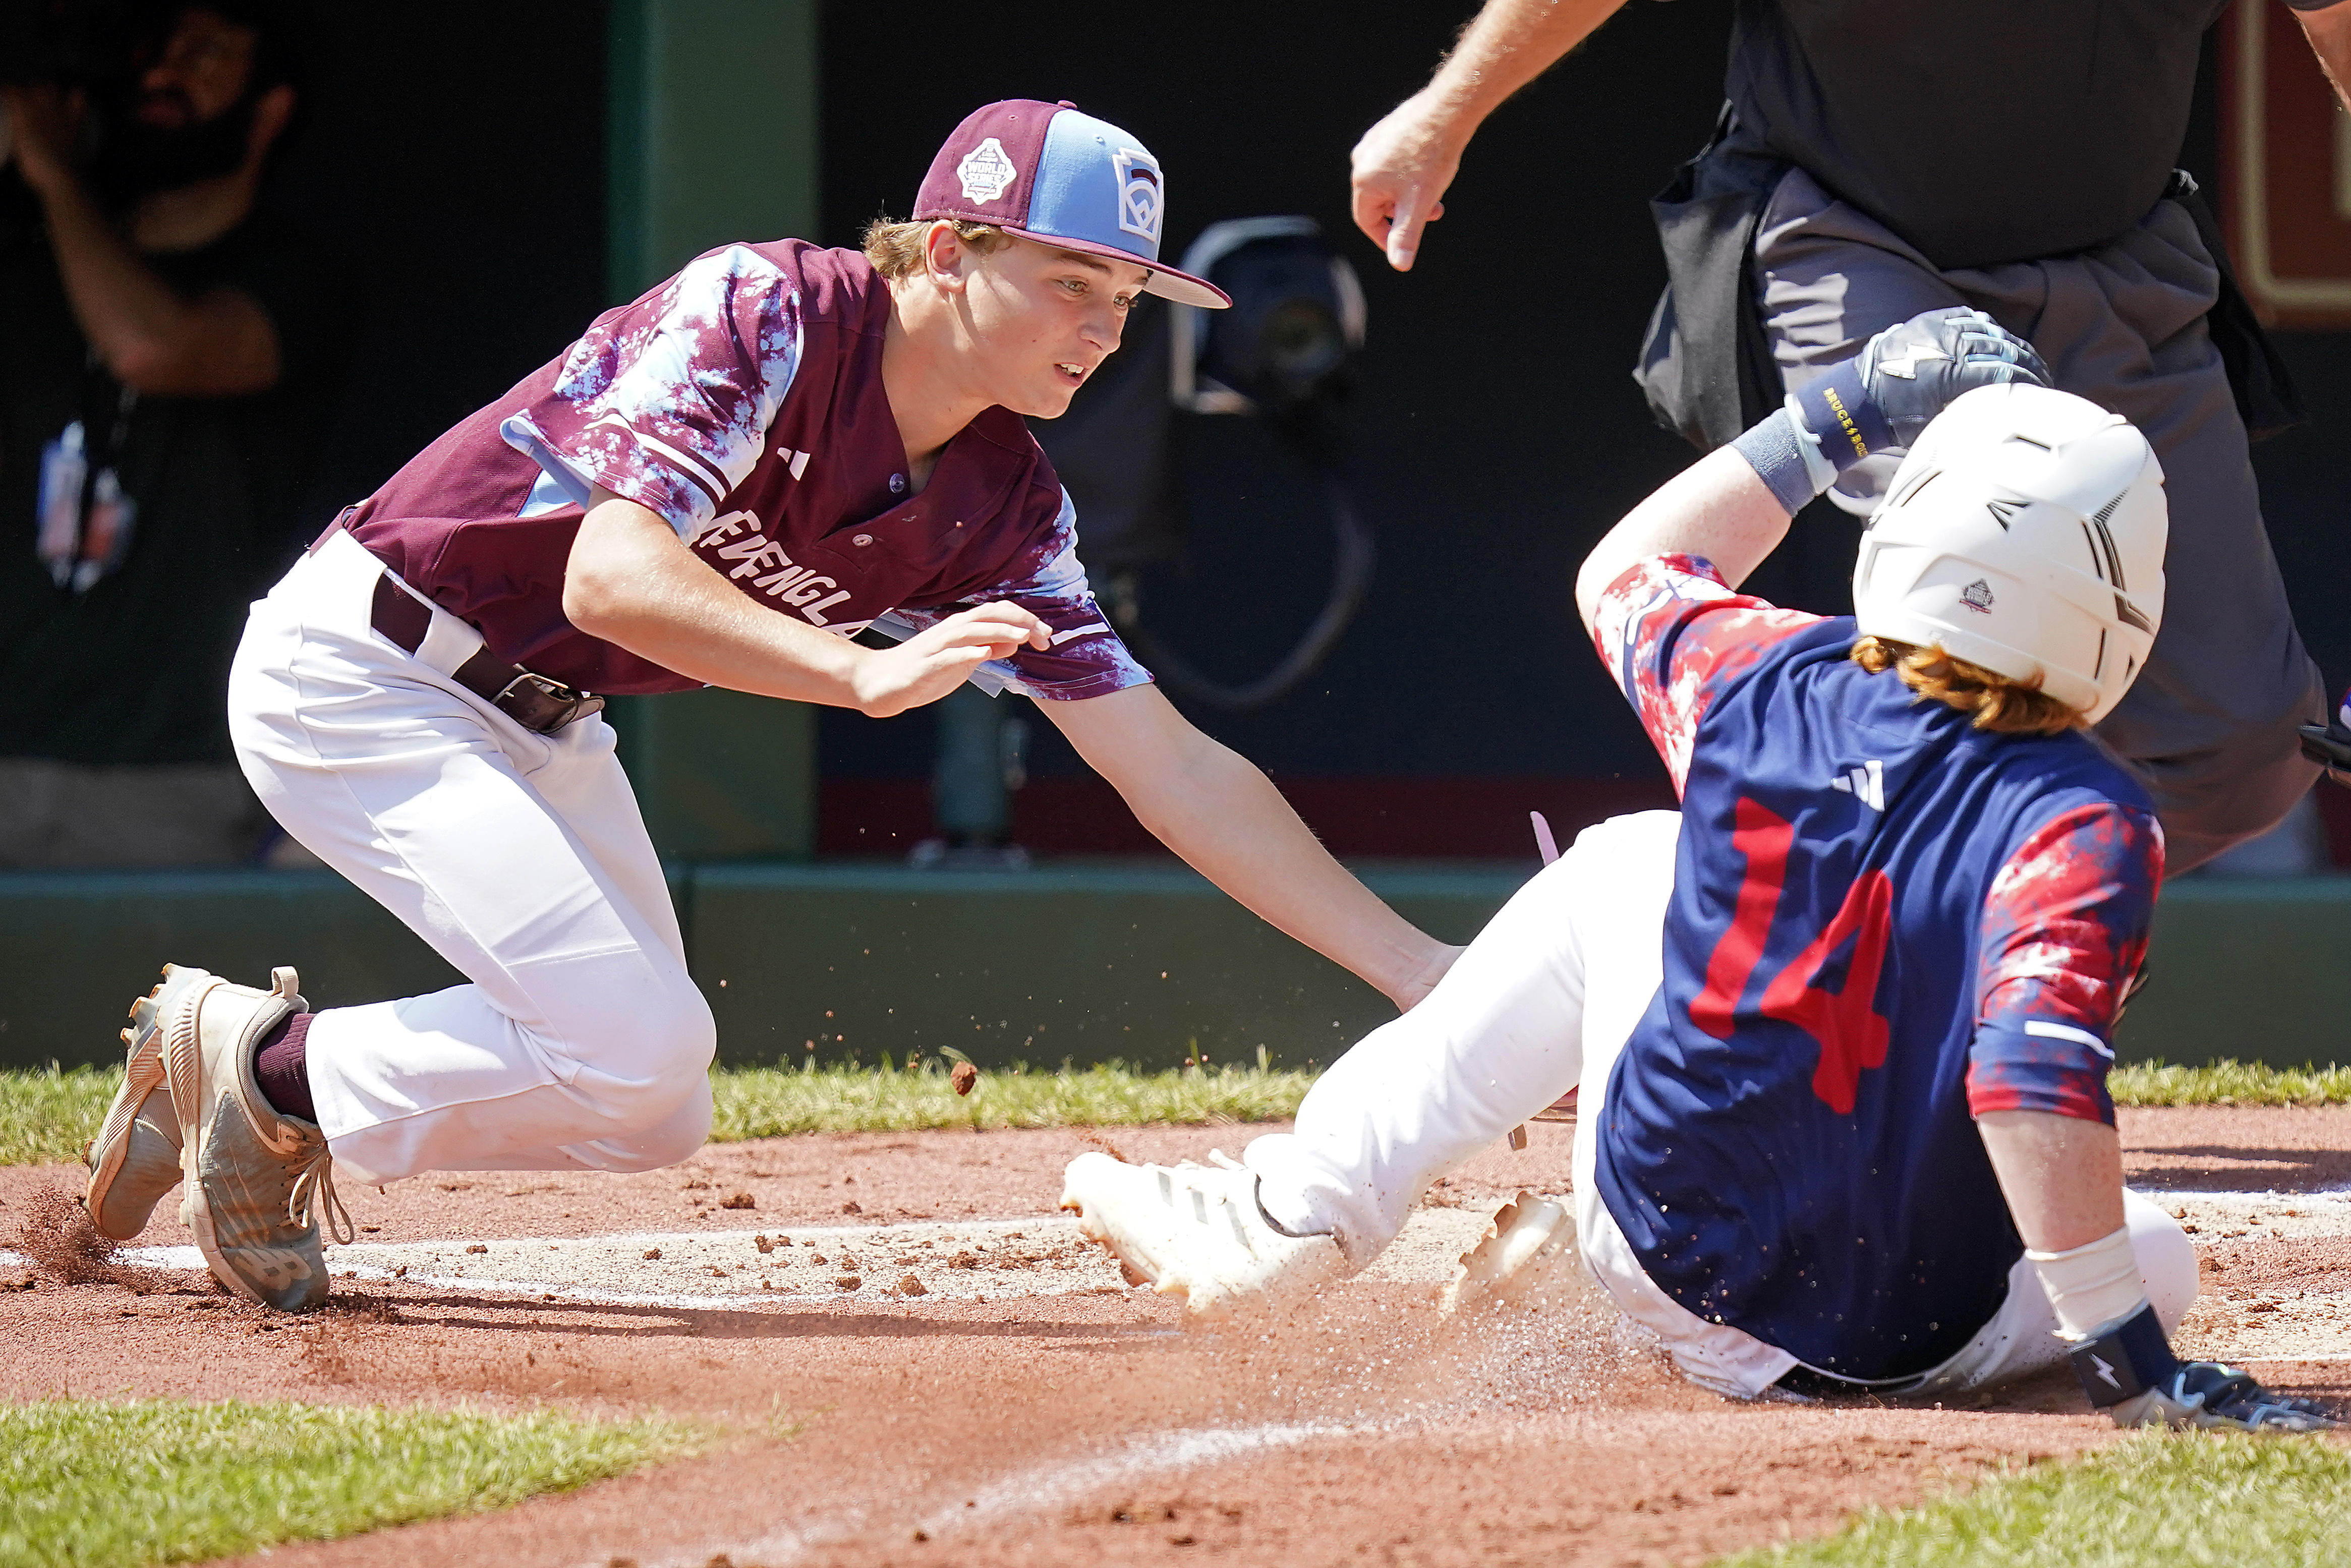 Loss eliminates Middleboro from Little League World Series